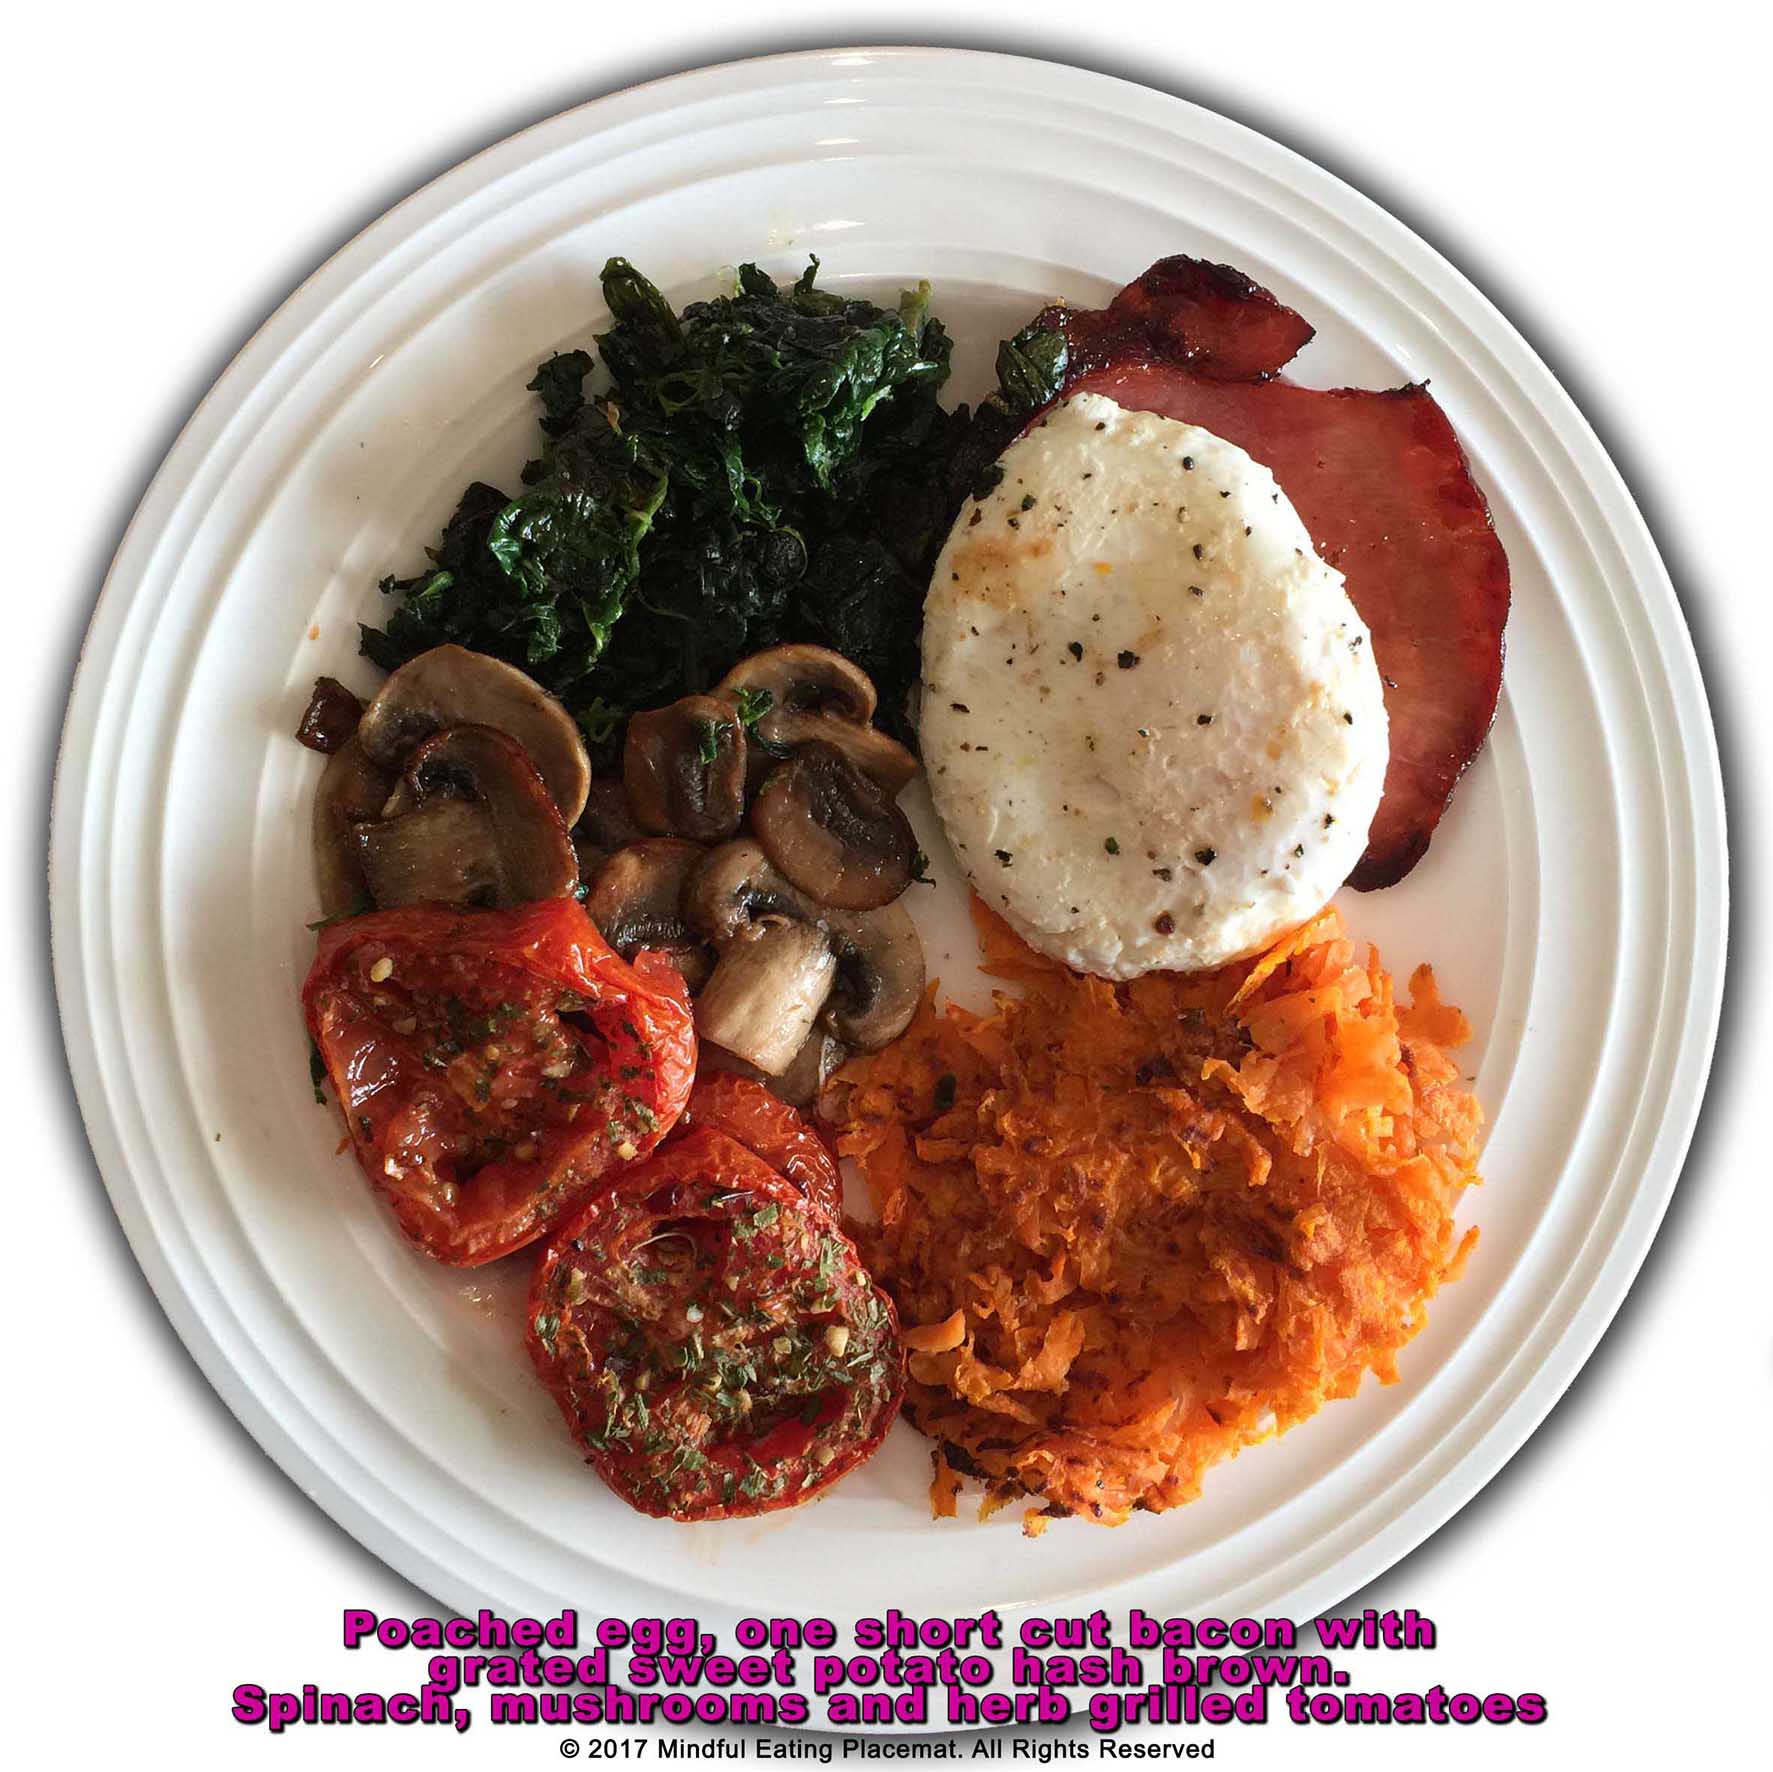 Poached egg, with one slice short cut bacon with sweet potato hashbrown, grilled tomatoes, mushrooms and spinach